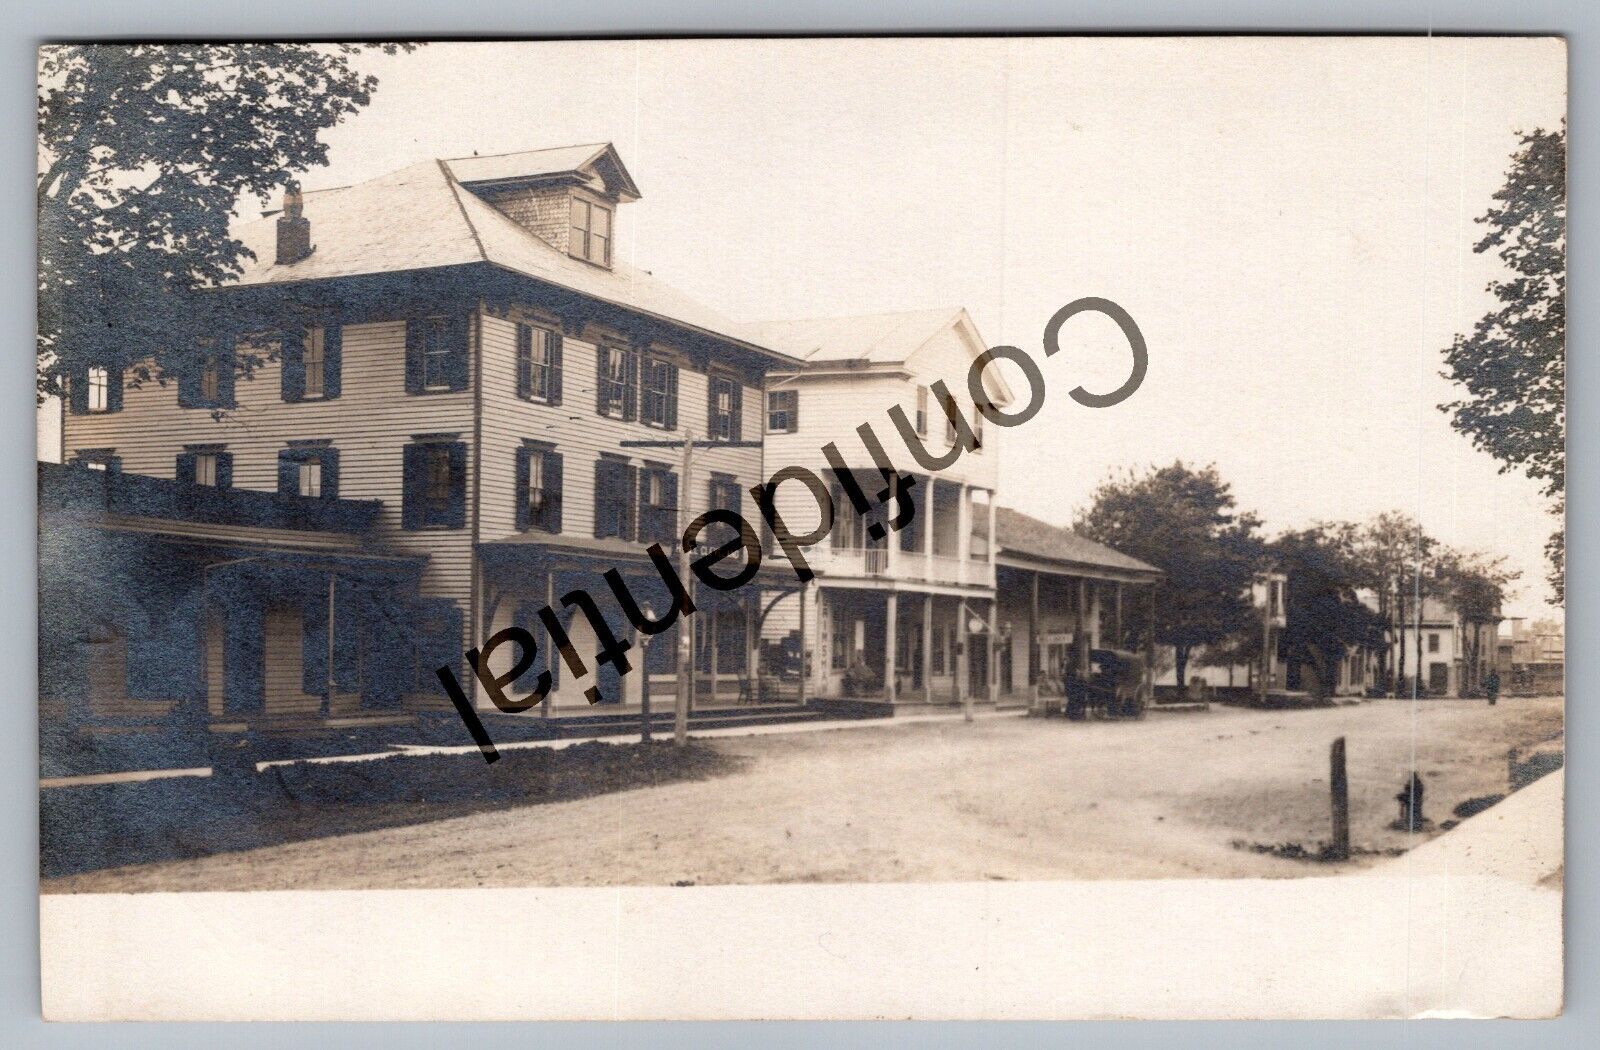 Real Photo Hotel Cleveland Storefronts & Wagon Cleveland NY New York RP RPPC D1